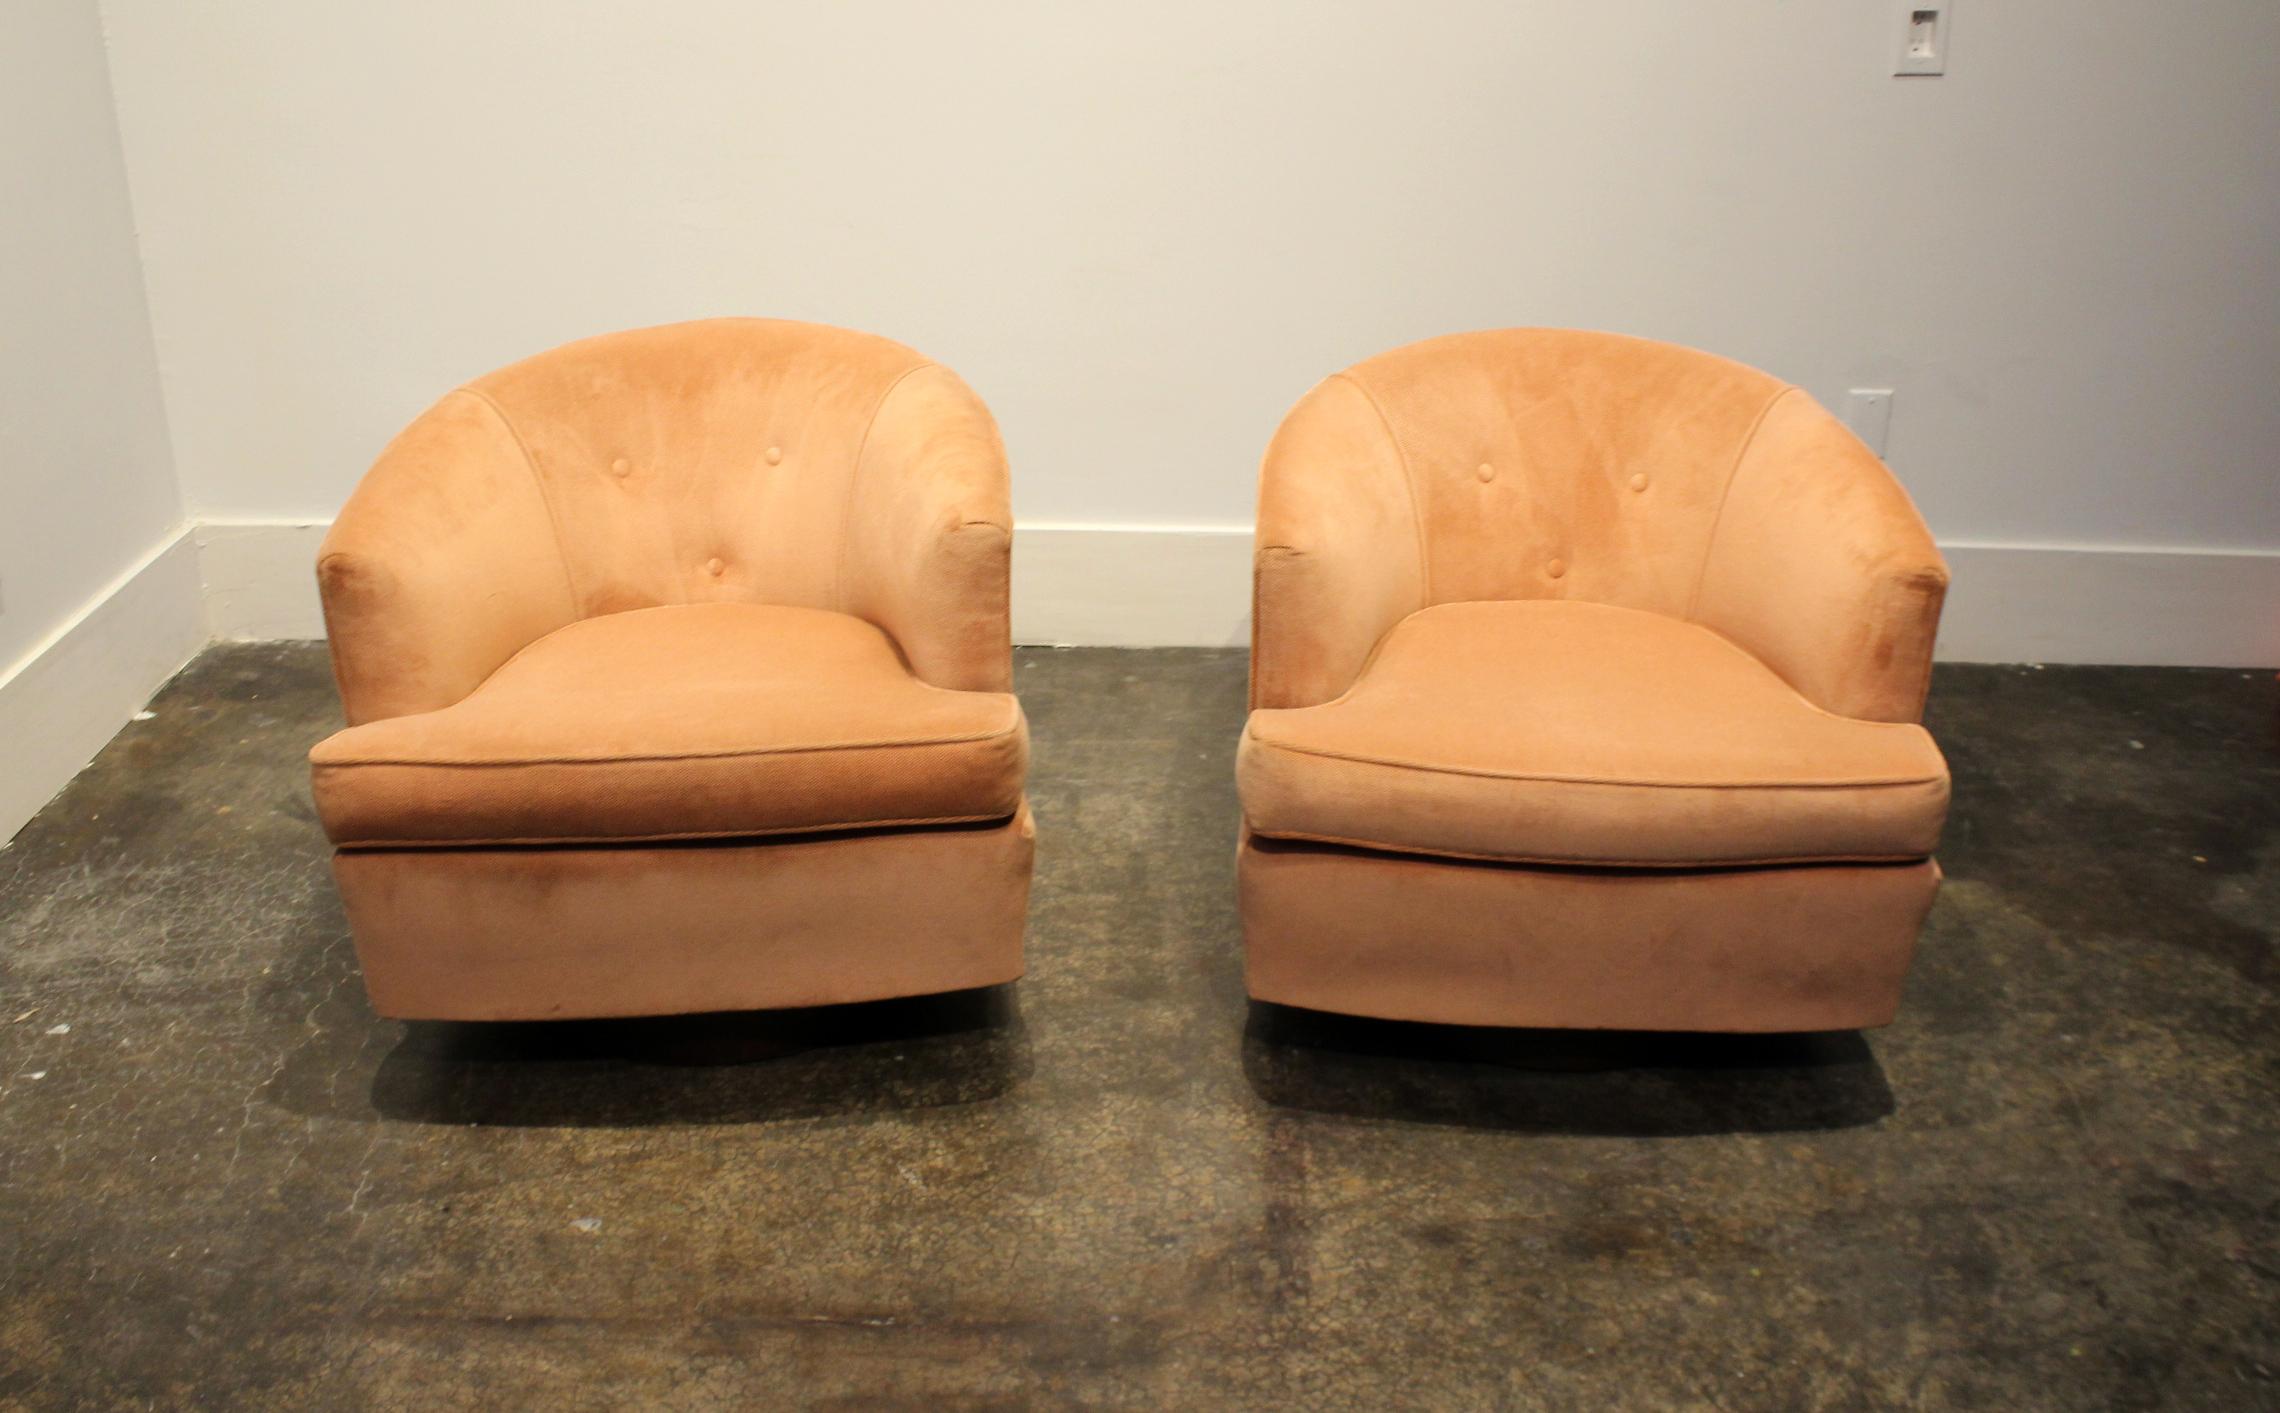 American Pink Milo Baughman Style Midcentury Swivel and Rock Tub Chairs - A Pair